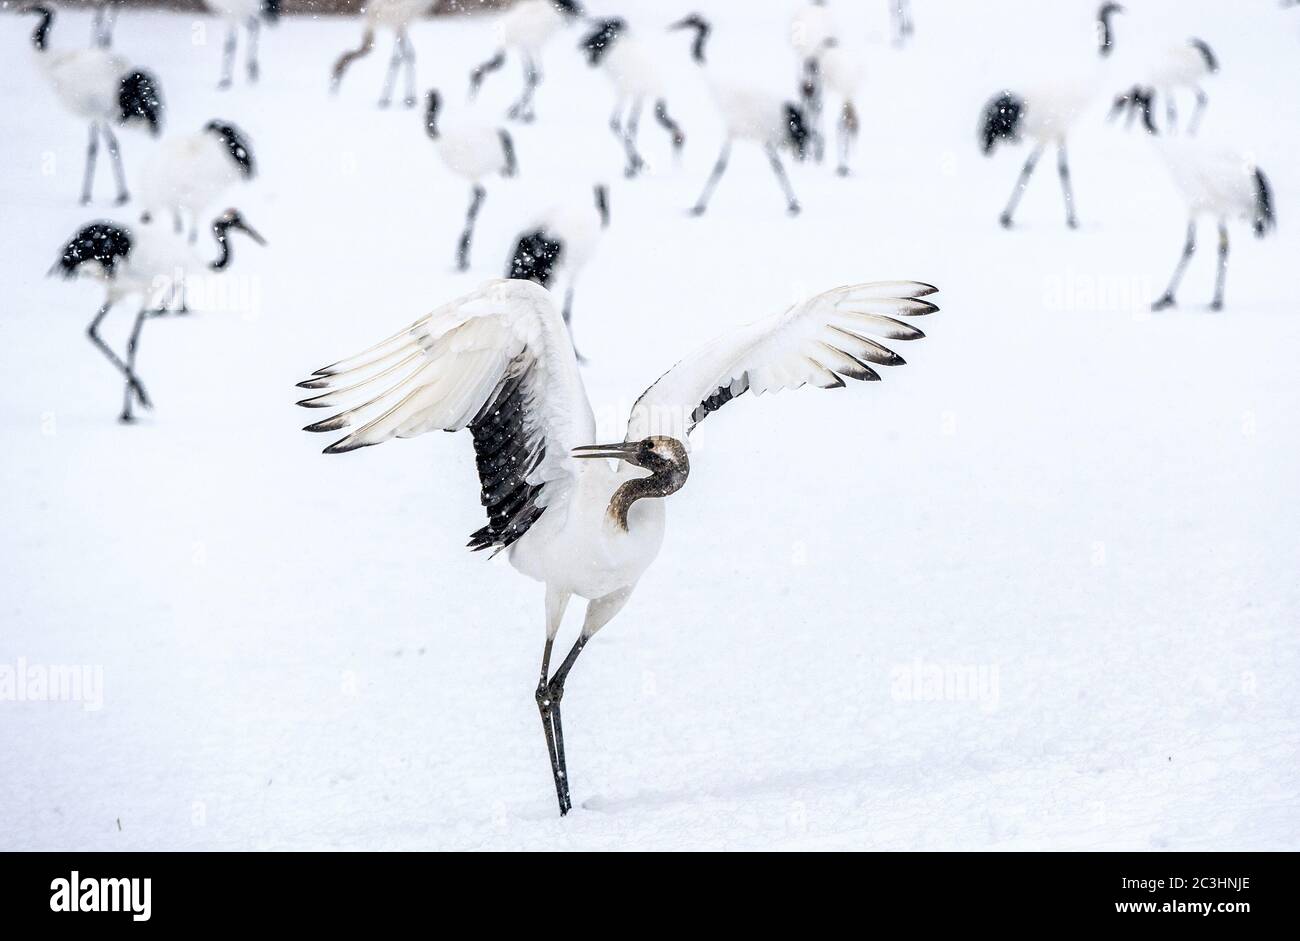 Dancing Crane. The ritual marriage dance of juvenile red-crowned crane. Scientific name: Grus japonensis, also called the Japanese crane or Manchurian Stock Photo